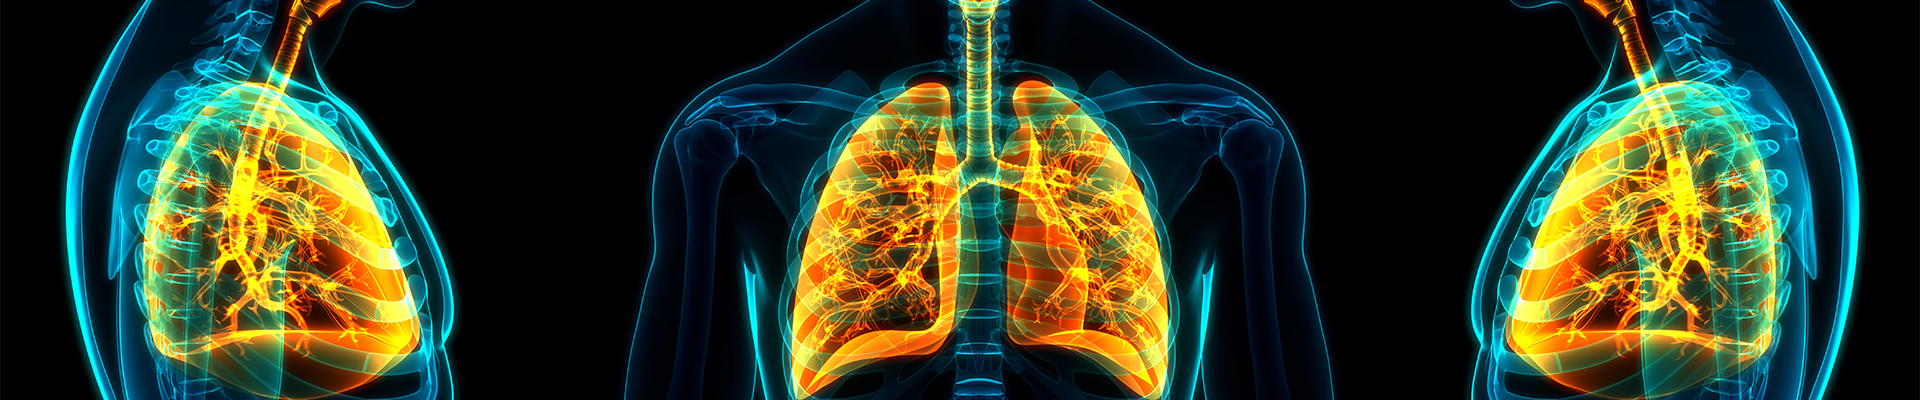 stock image: lungs